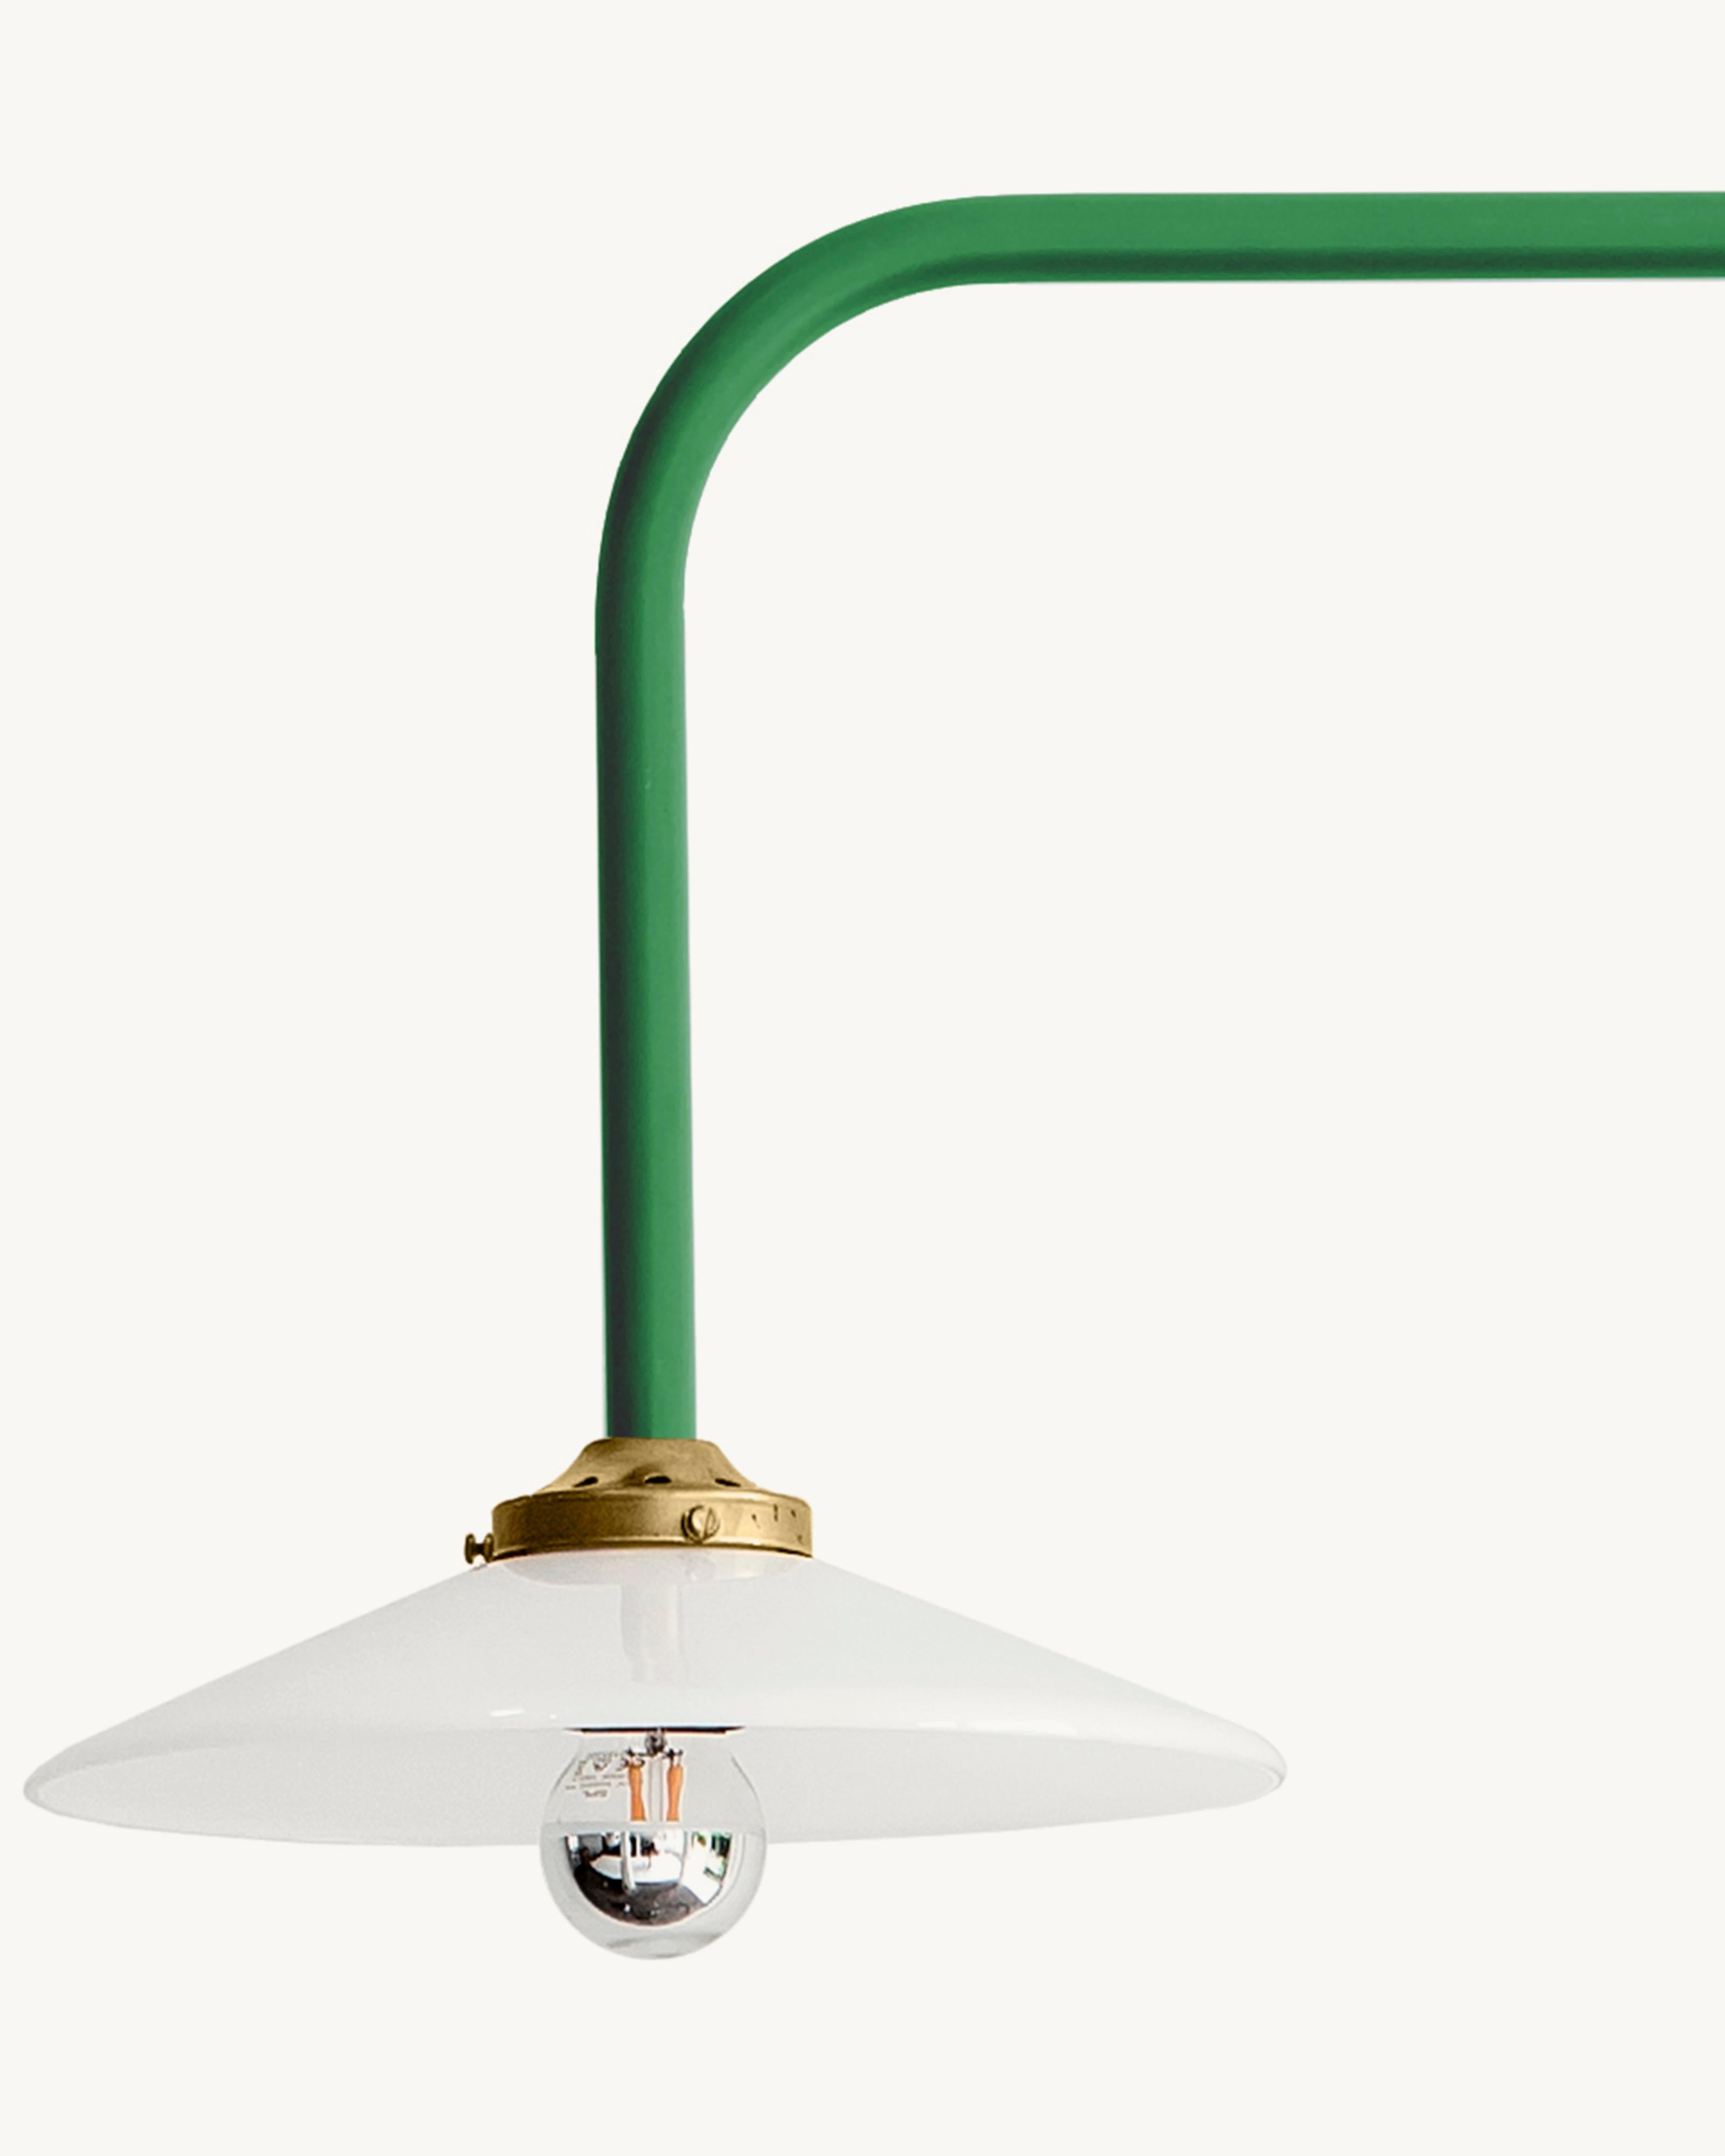 Hanging Lamp N°4 by Muller Van Severen x Valerie Objects

Dimensions: L. 90 W. 25 H. 180 CM
Finish: Green

Specifications:
— light source: 4W led
— colour tempertaure: K2700 
— lumen 350
— IP rating 20
— dimmable

Material: 
— lamp frame in steel